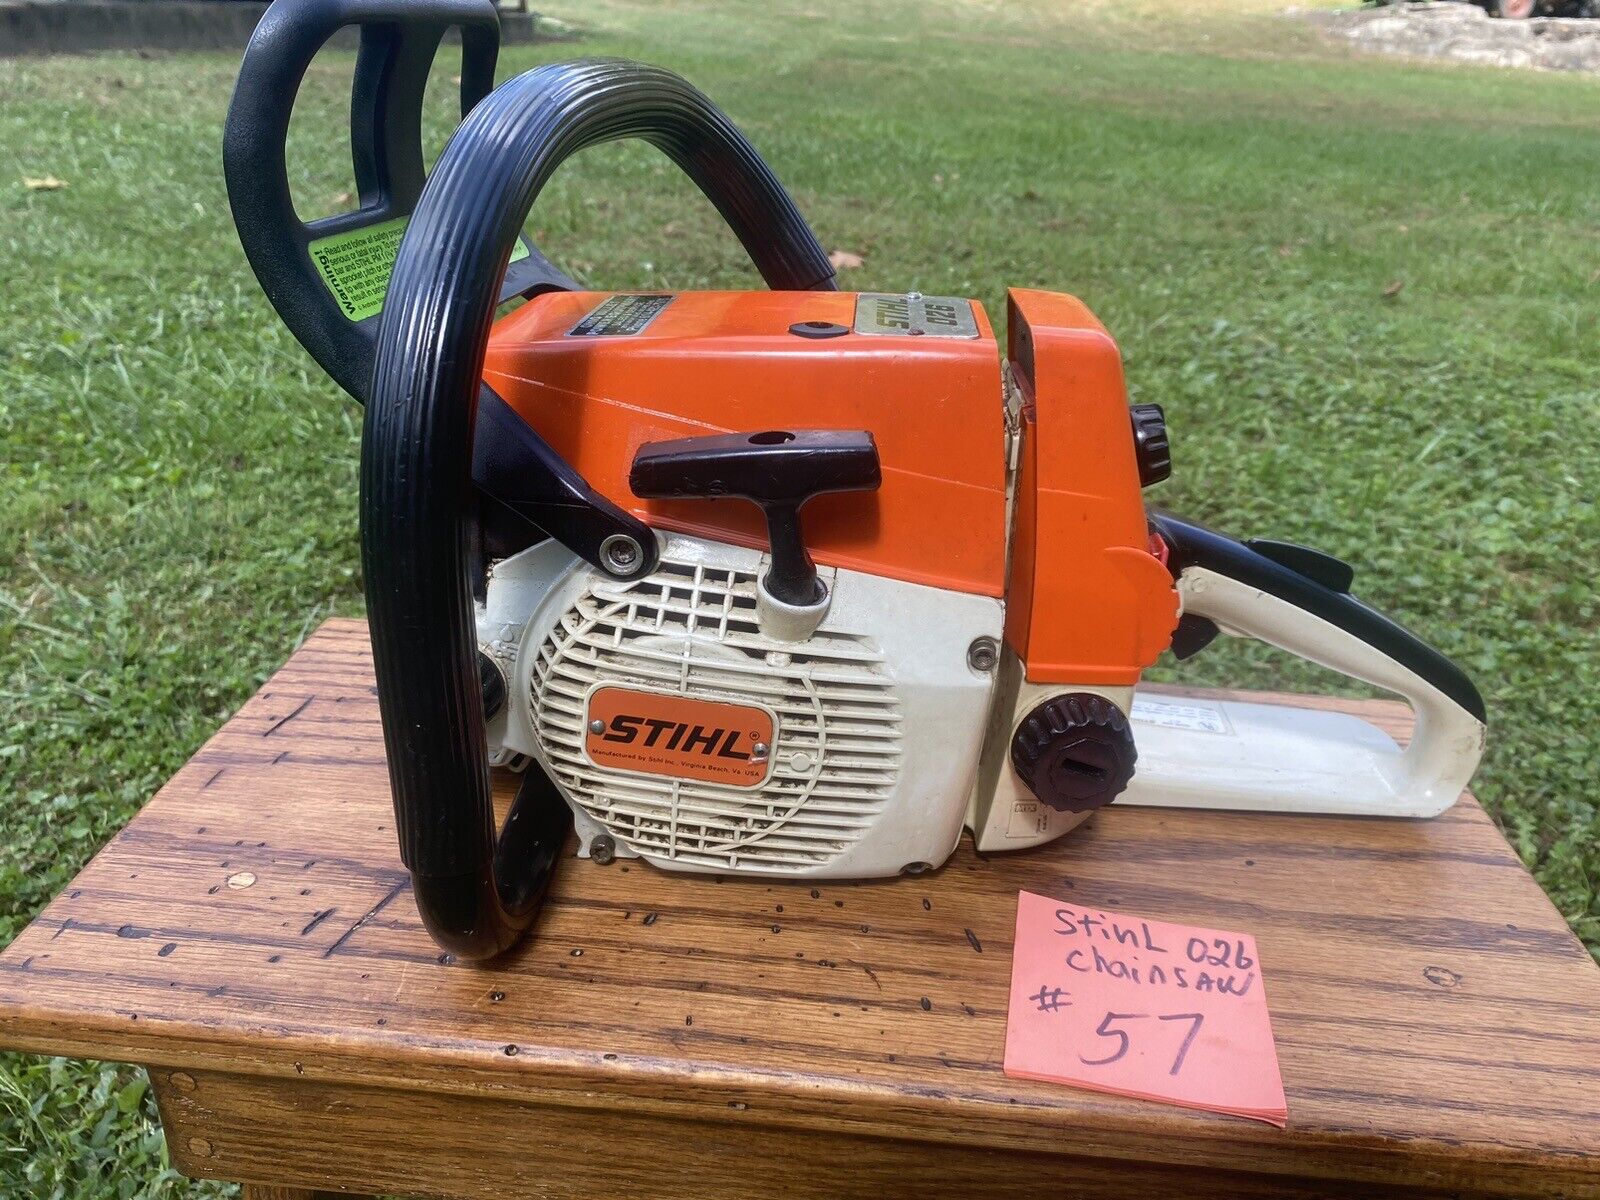 STIHL 026 PROFESSIONAL CHAINSAW,  175 # COMPRESSION !  0NE OWNER- NICE SAW #57. Available Now for $499.99